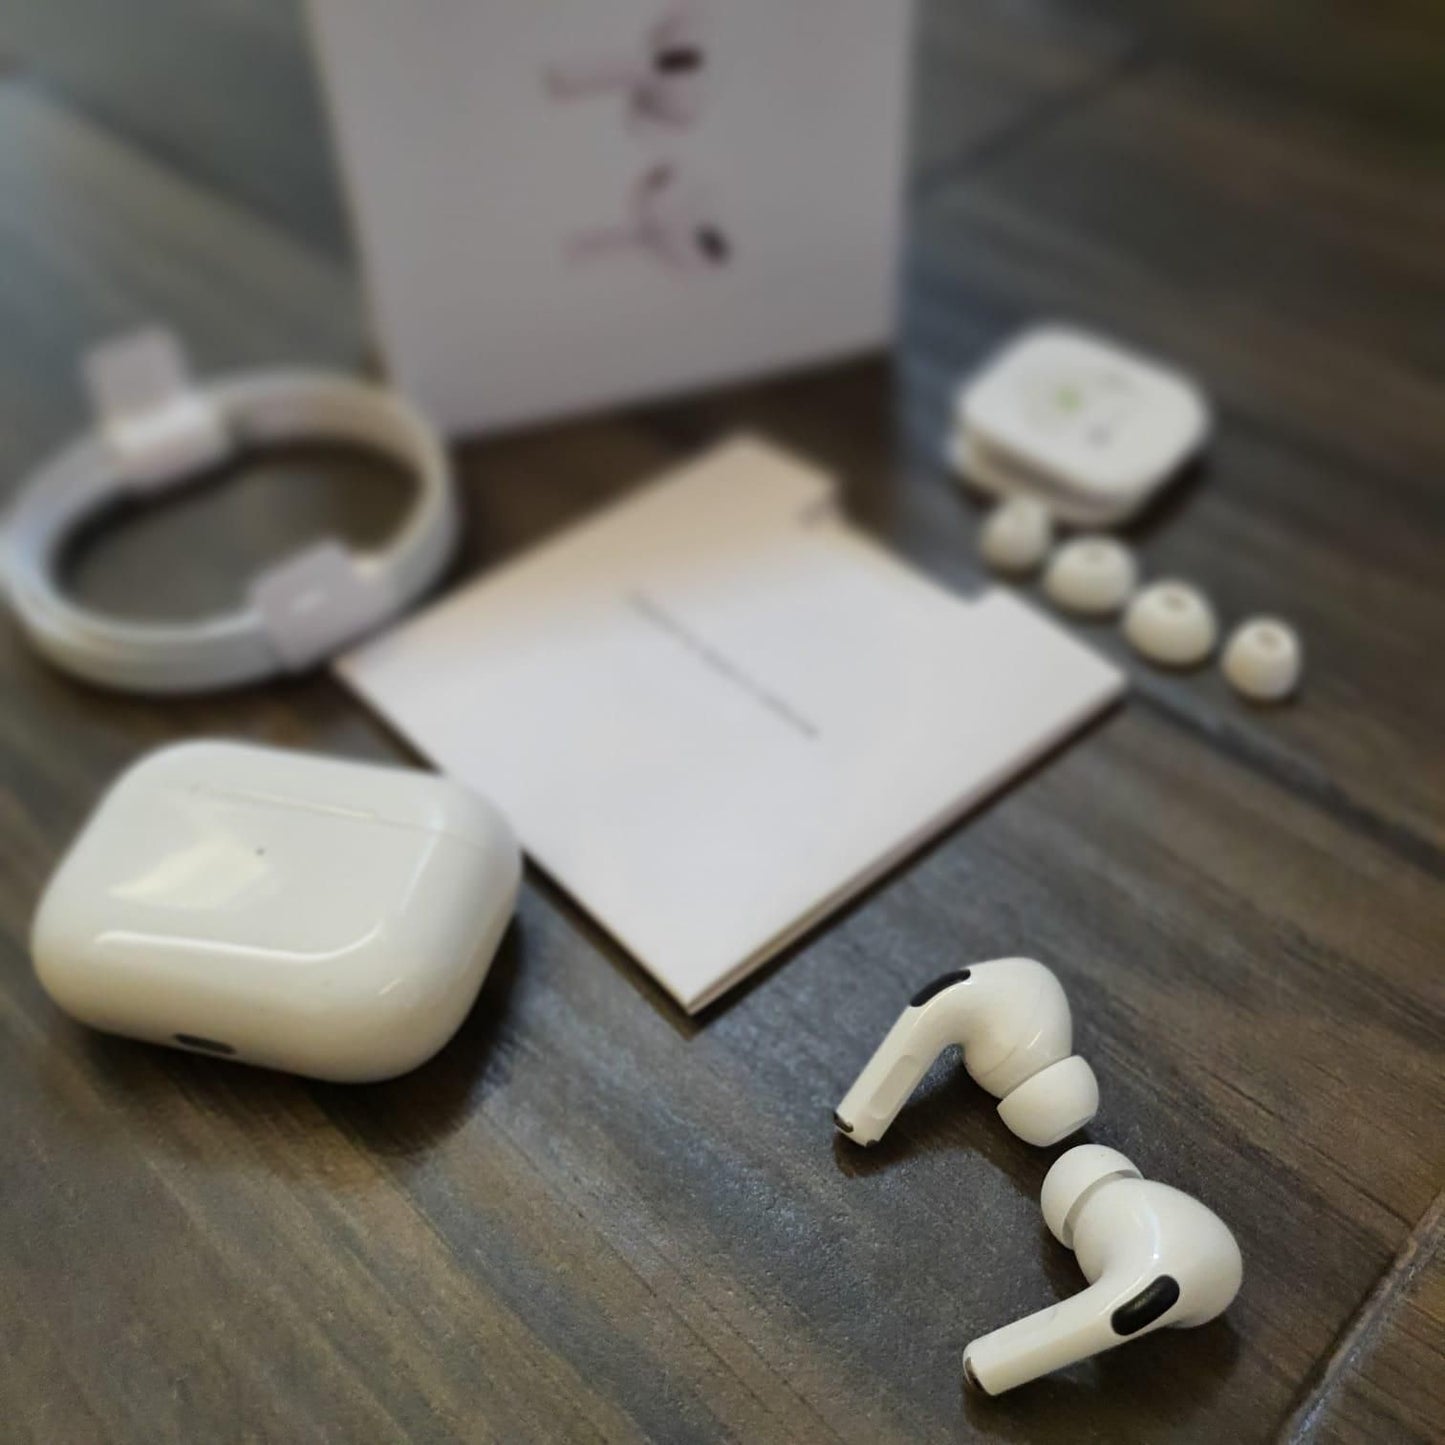 Wireless Bluetooth Airpods With Mic